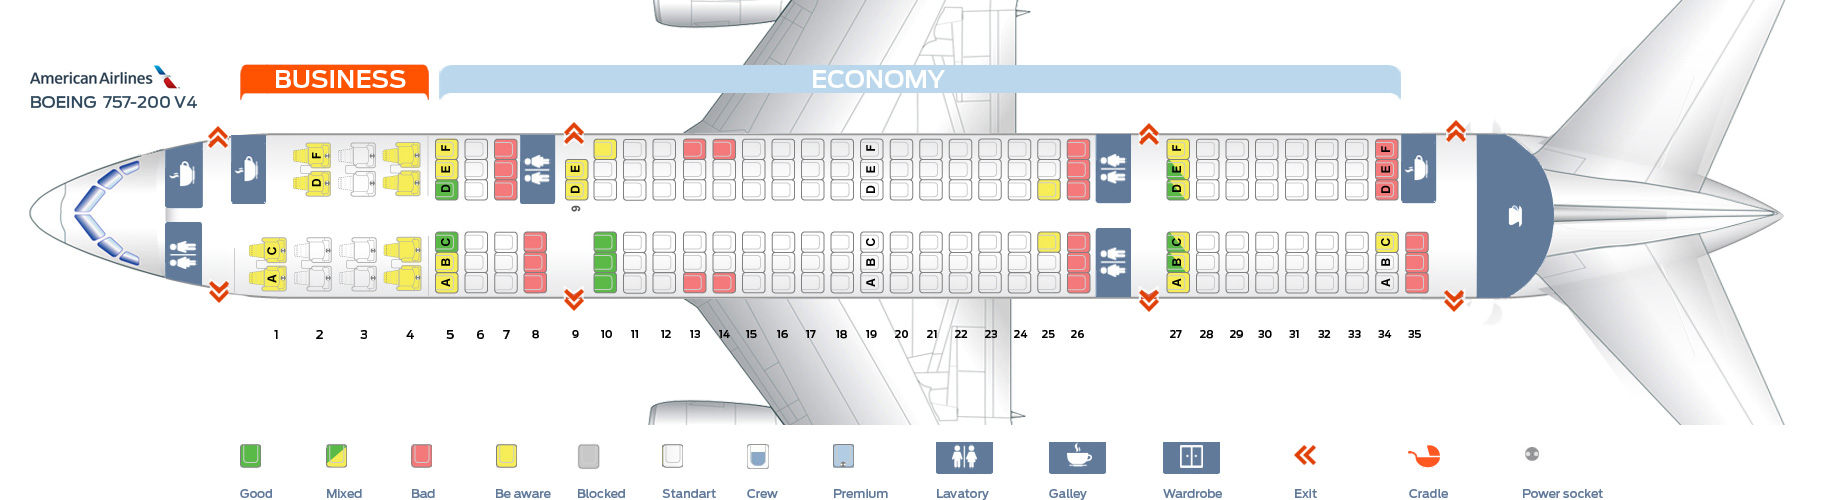 Seat map Boeing 757200 American Airlines. Best seats in the plane